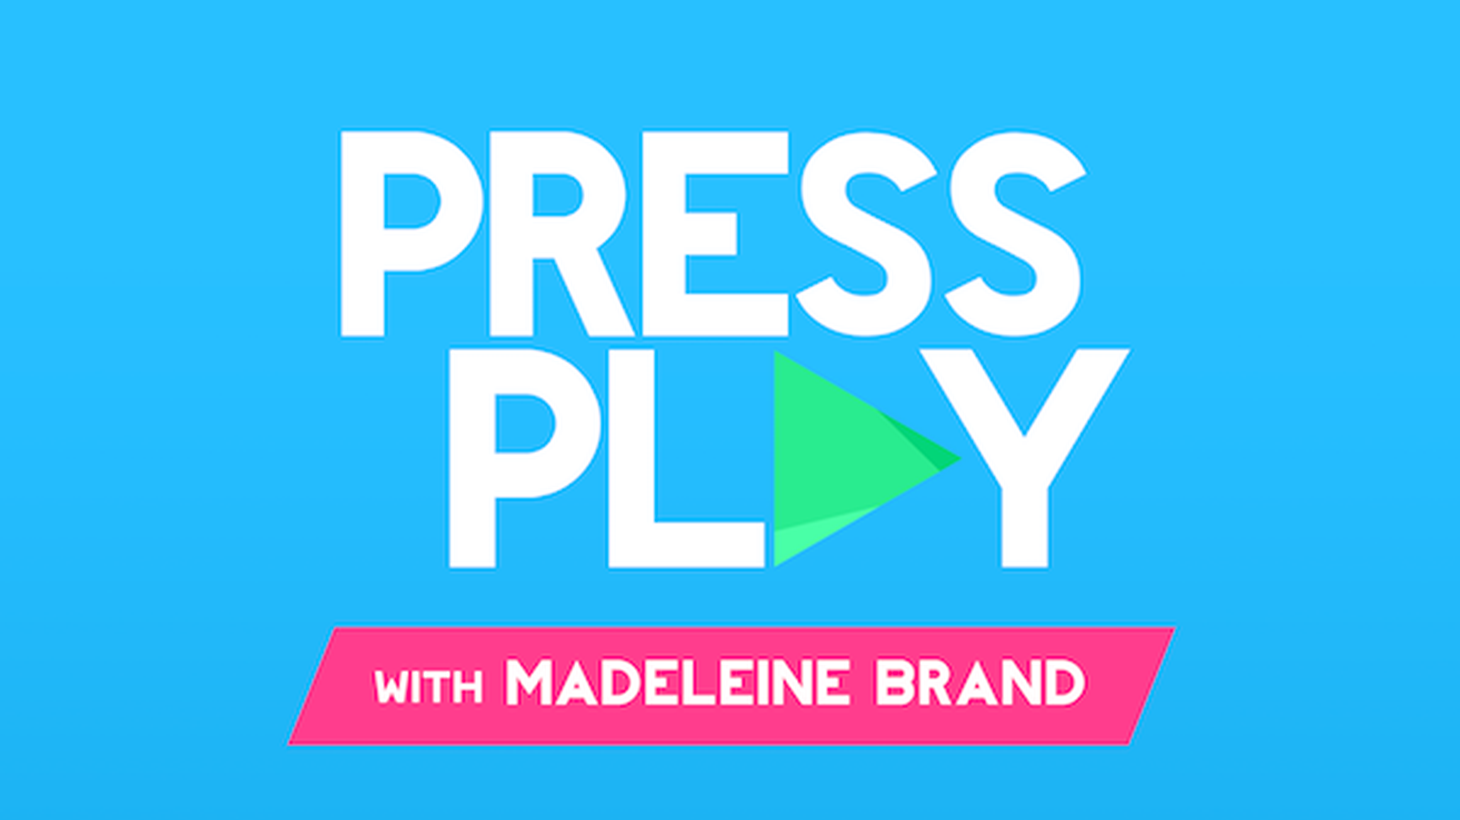 Today on Press Play: The Fort Hood shooting, LA's sprawl, marijuana that treats epilepsy, and is Obama still the "Deporter in Chief"?